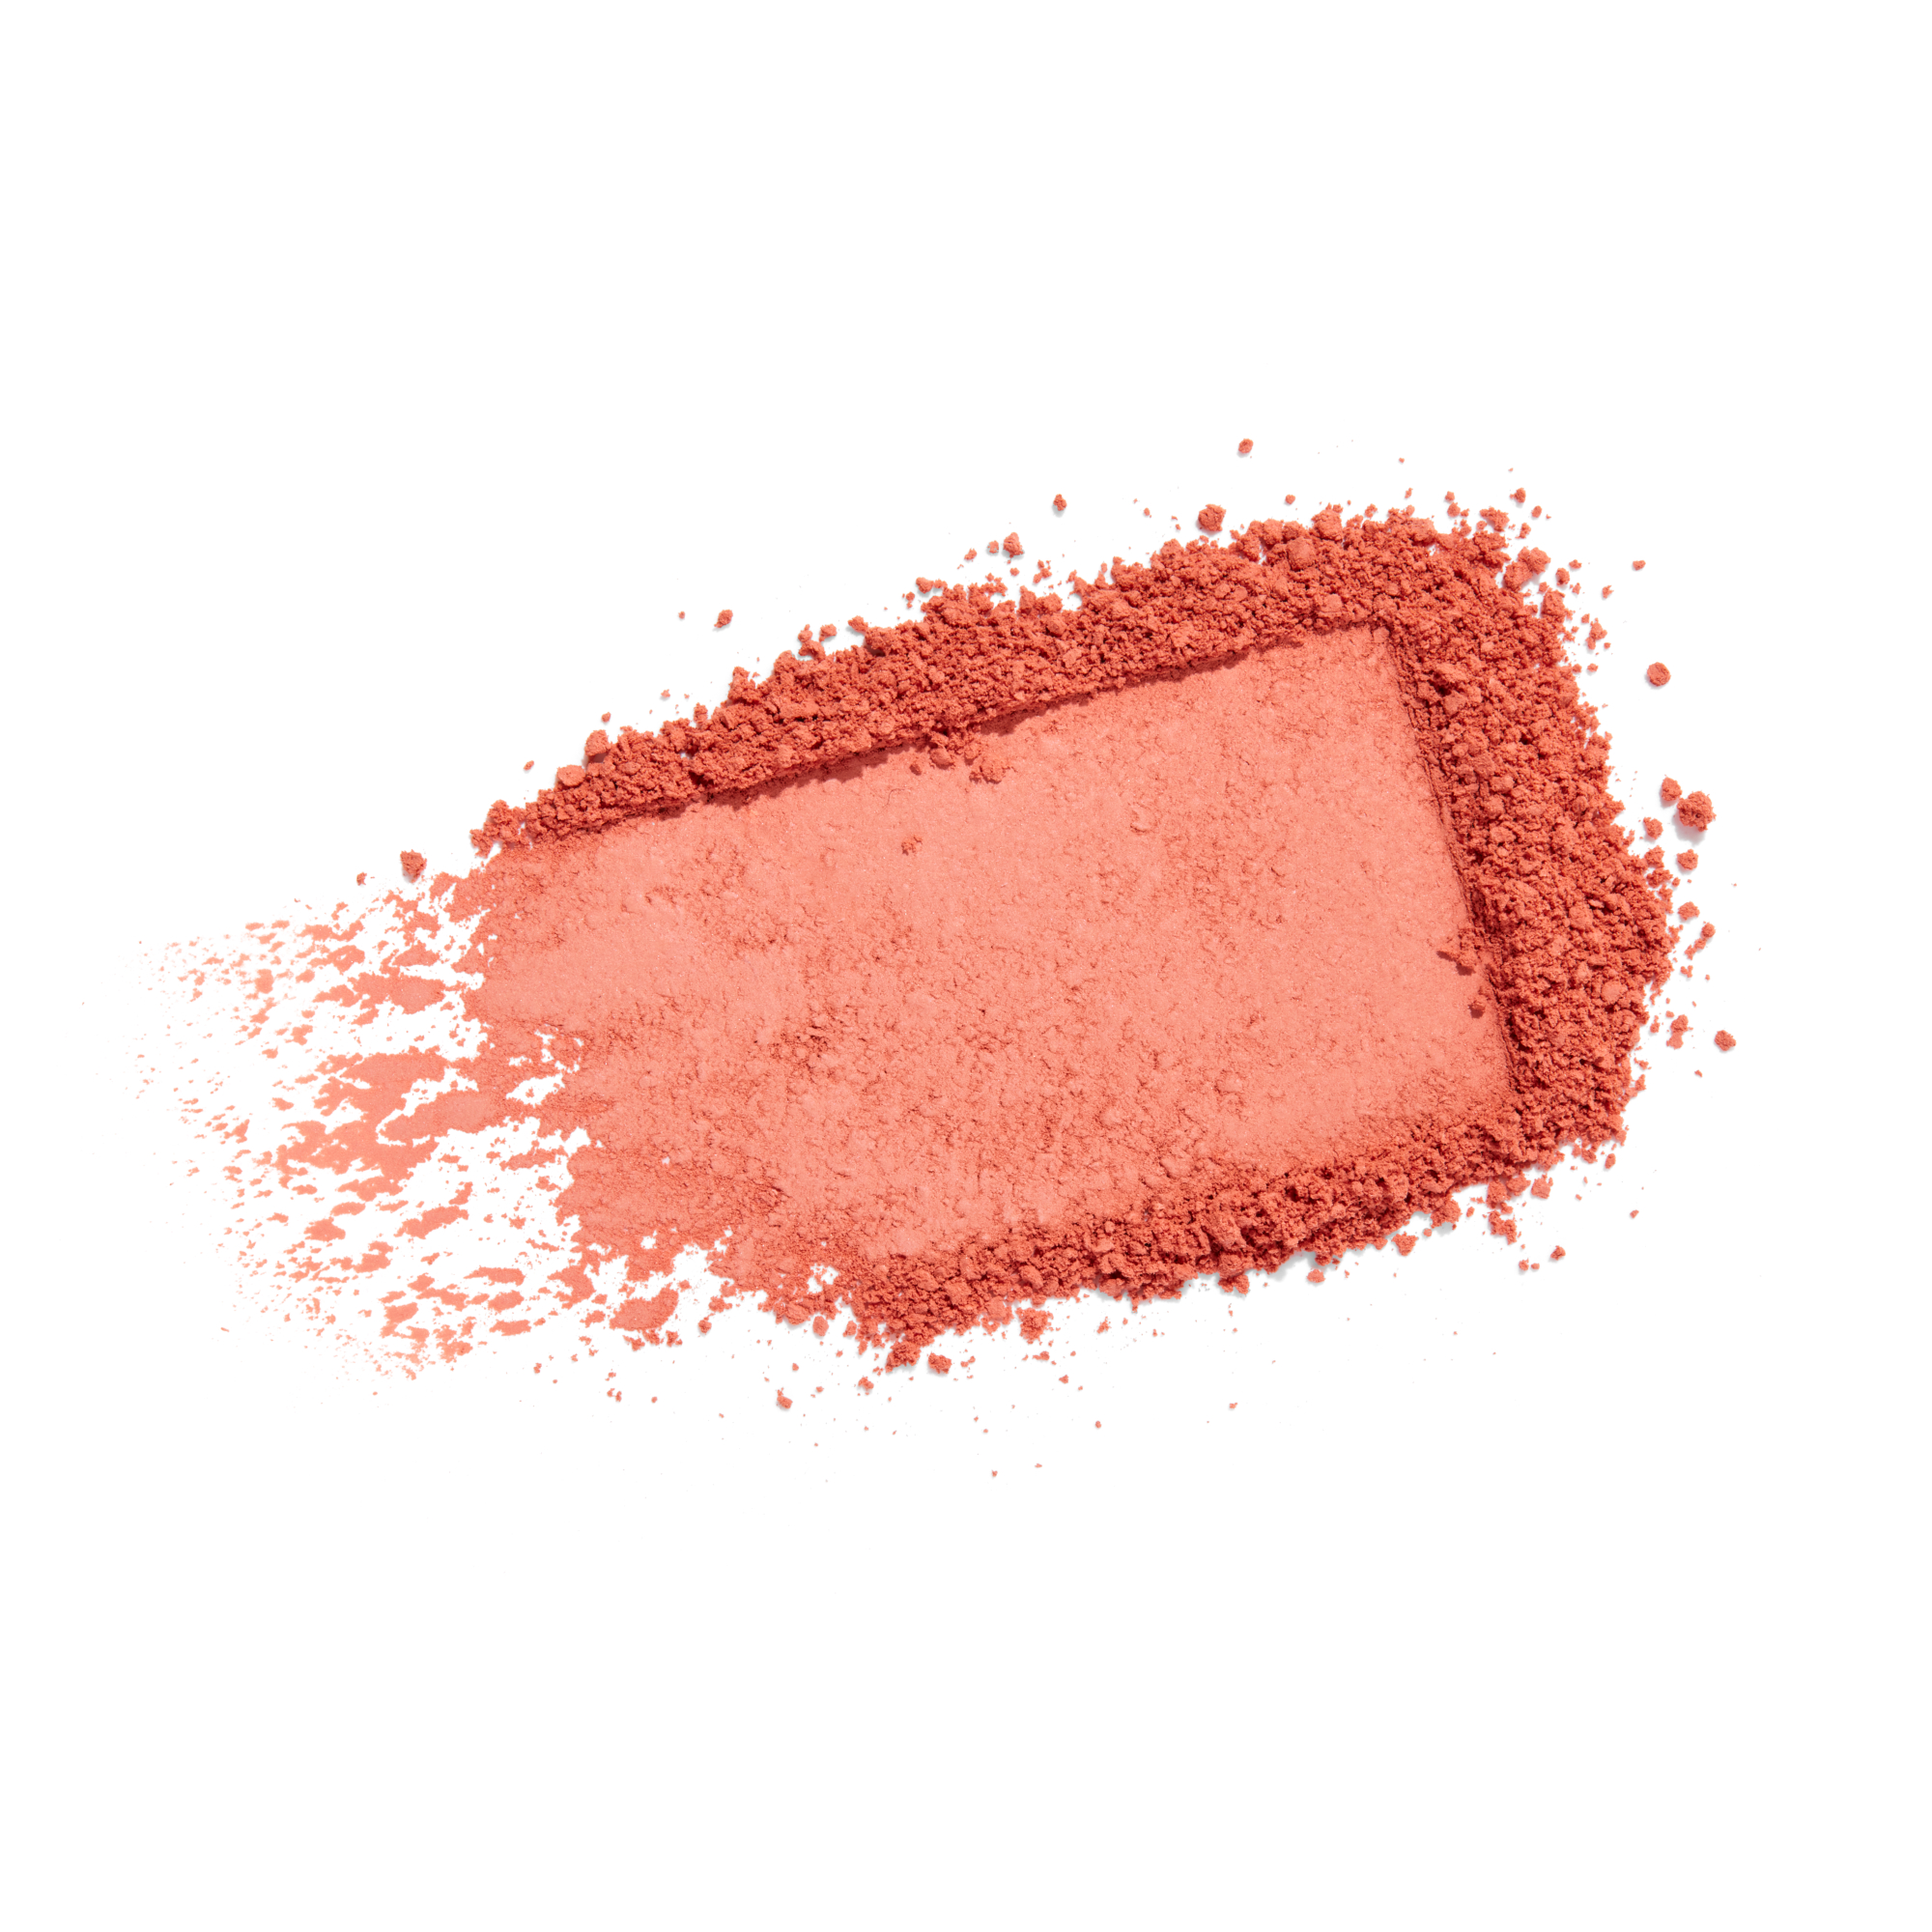 Benefit Cosmetics Sunny Warm Coral Blush, In Colour: Coral, Size: Full Size